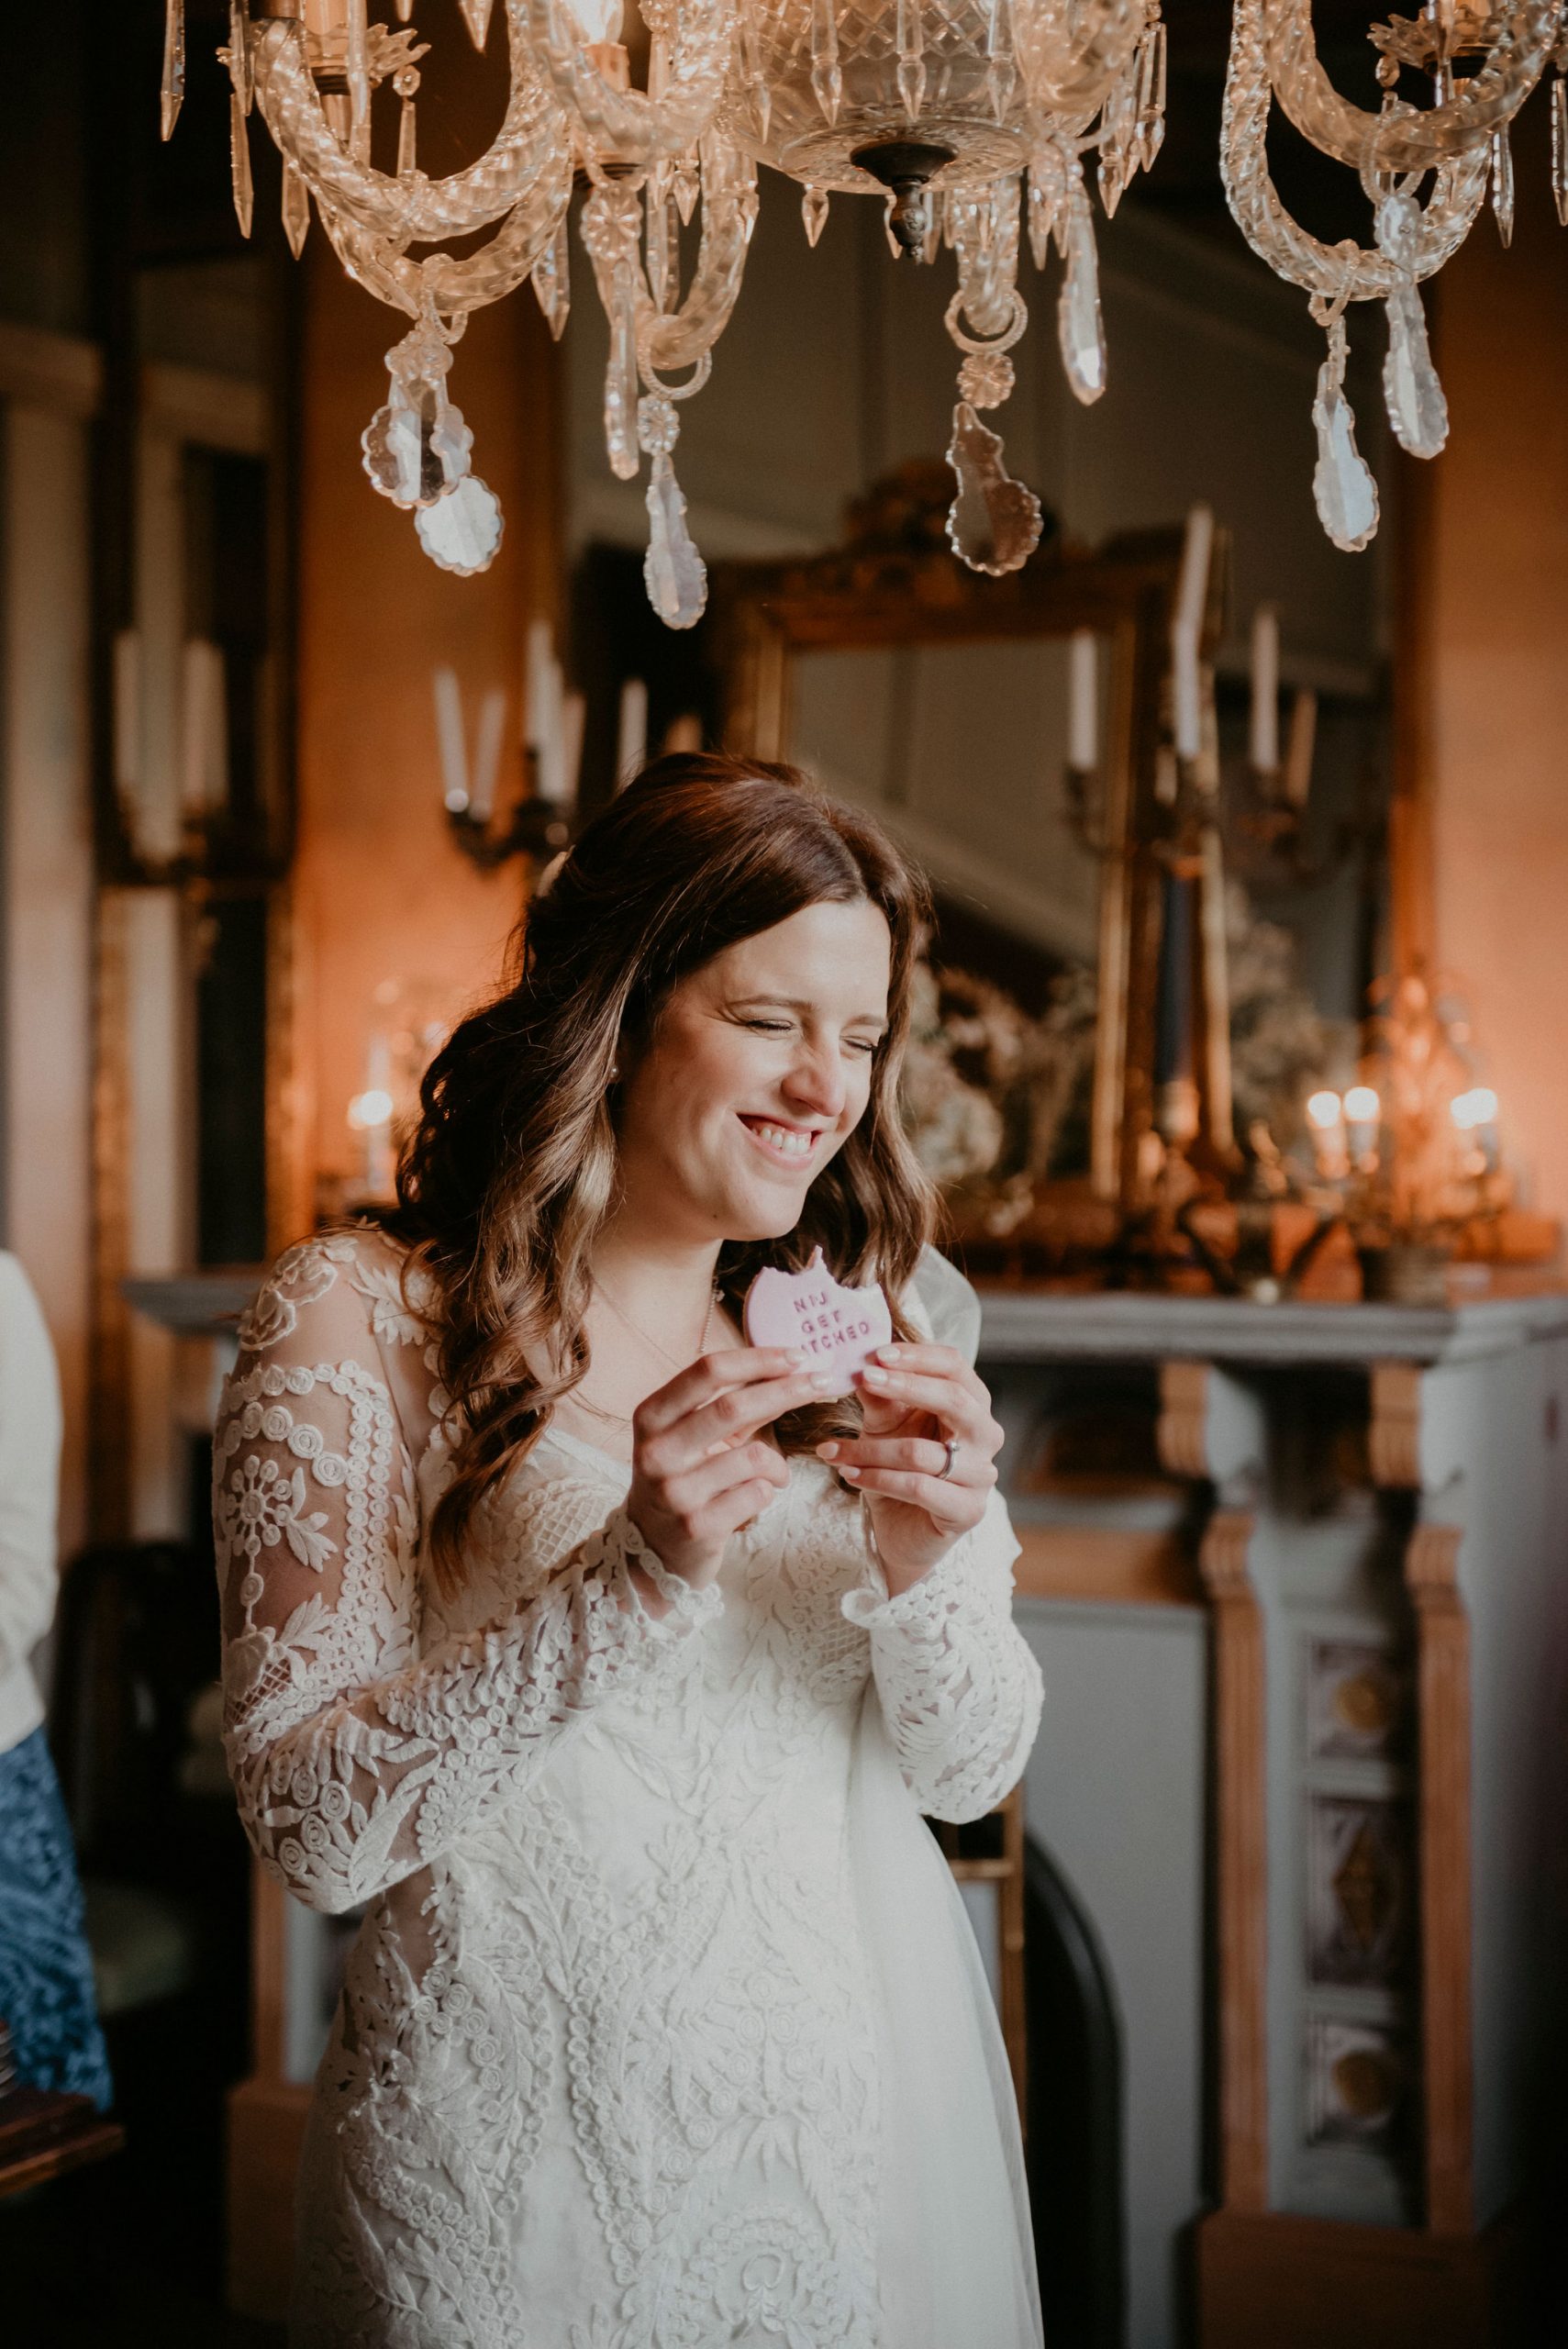 Contact Elopement Package Let's Elope Melbourne - We would be delighted to discuss your plans for your intimate wedding. Celebrant Amanda Matler and Photographer Sarah Matler